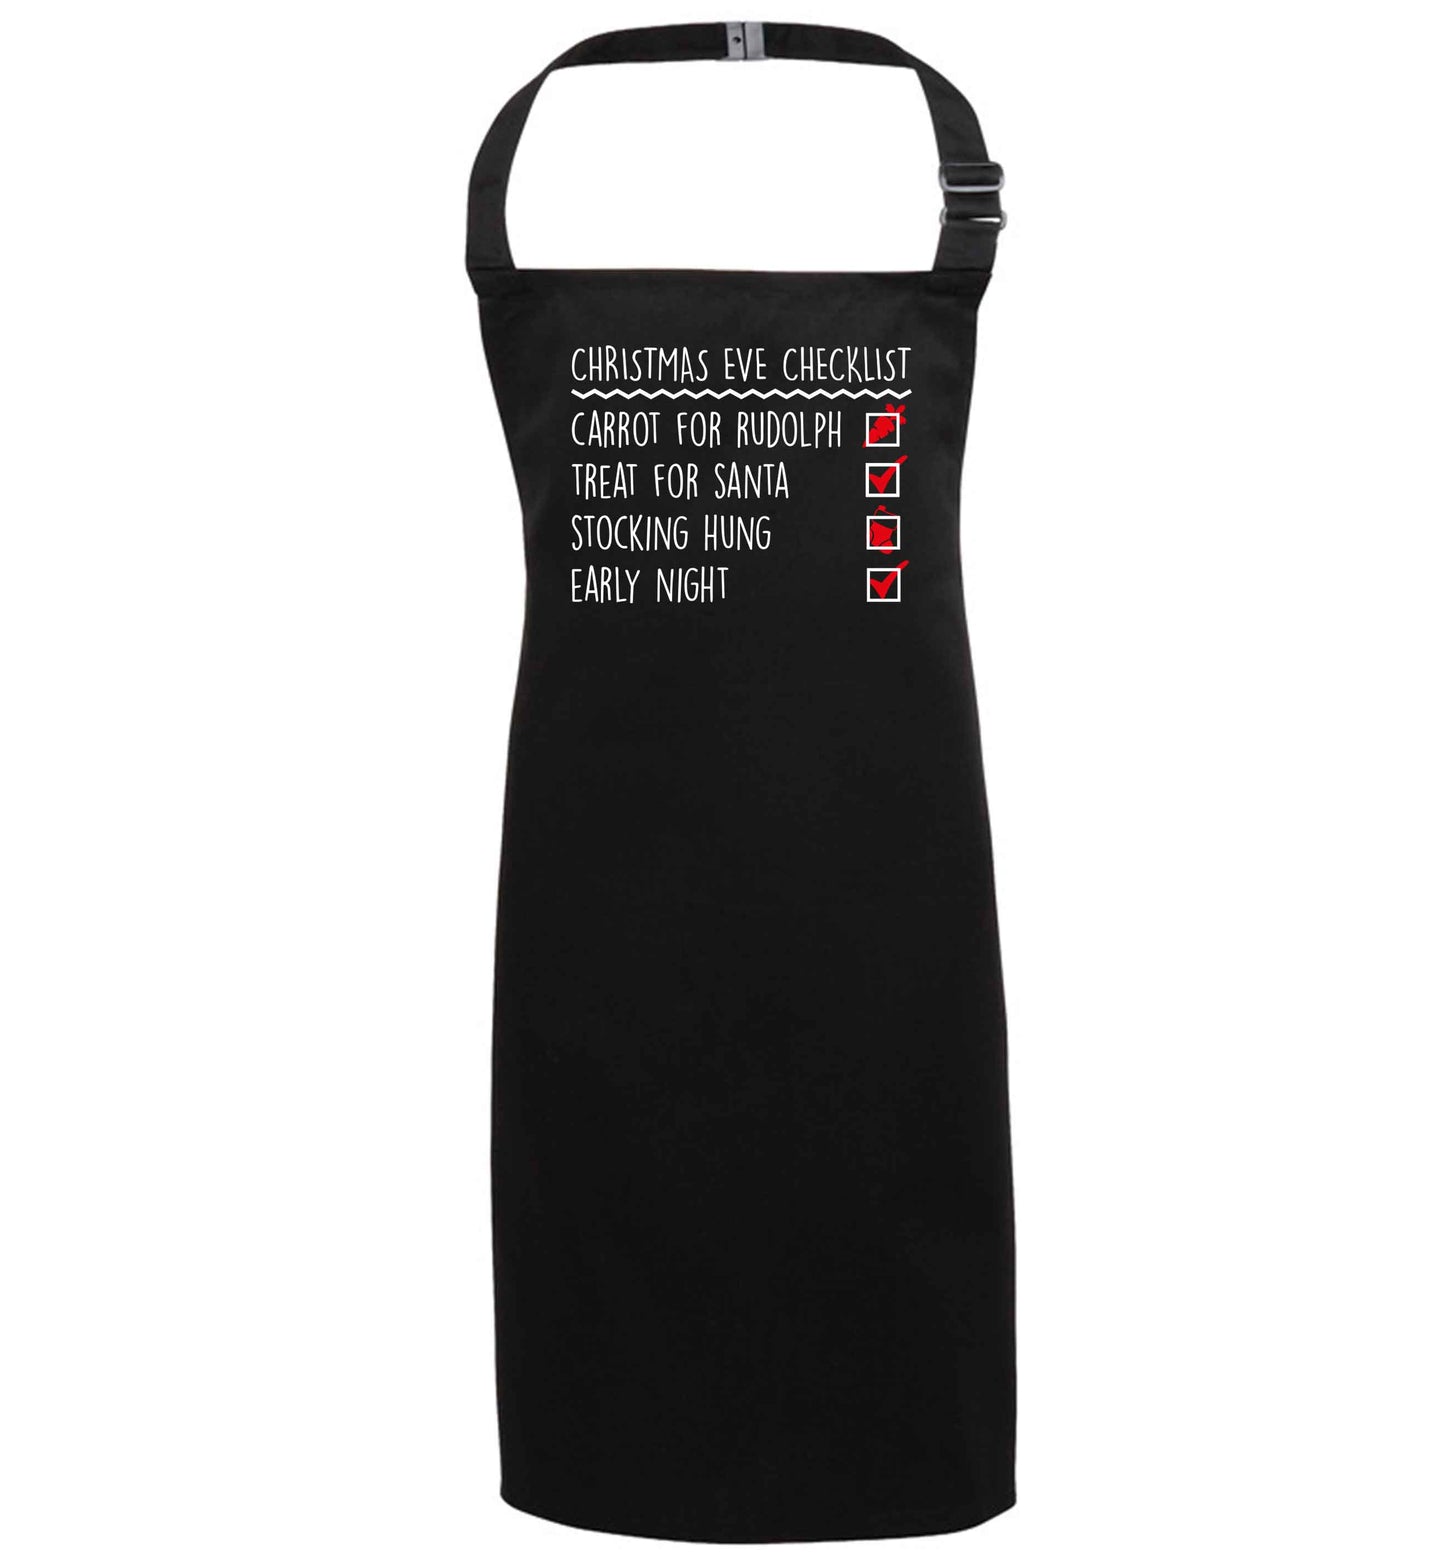 Candy Canes Candy Corns black apron 7-10 years